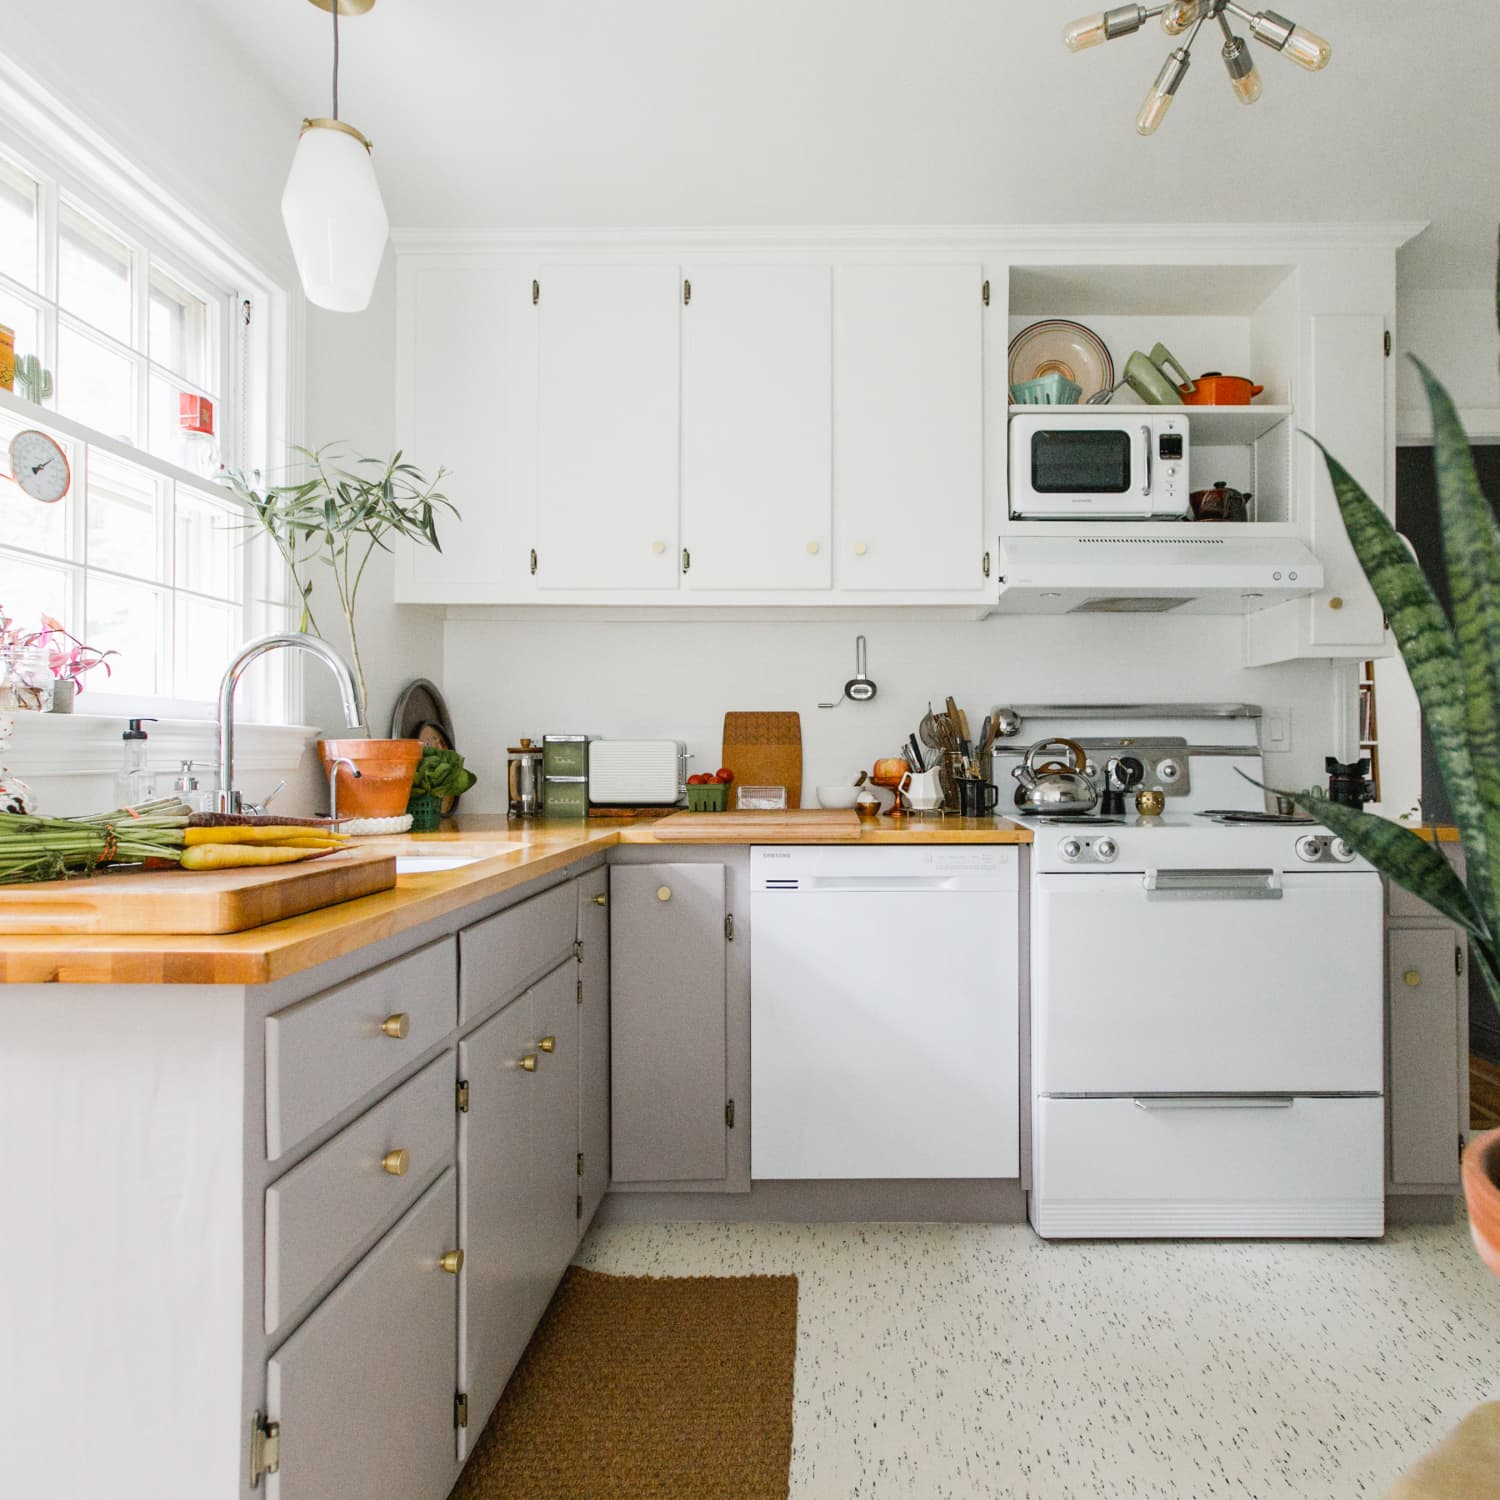 Kitchen Decorating Trends To Avoid 2020 Kitchn See top kitchen paint colors you can copy for your own kitchen from brands like valspar, sherwin williams, martha stewart, and more. kitchen decorating trends to avoid